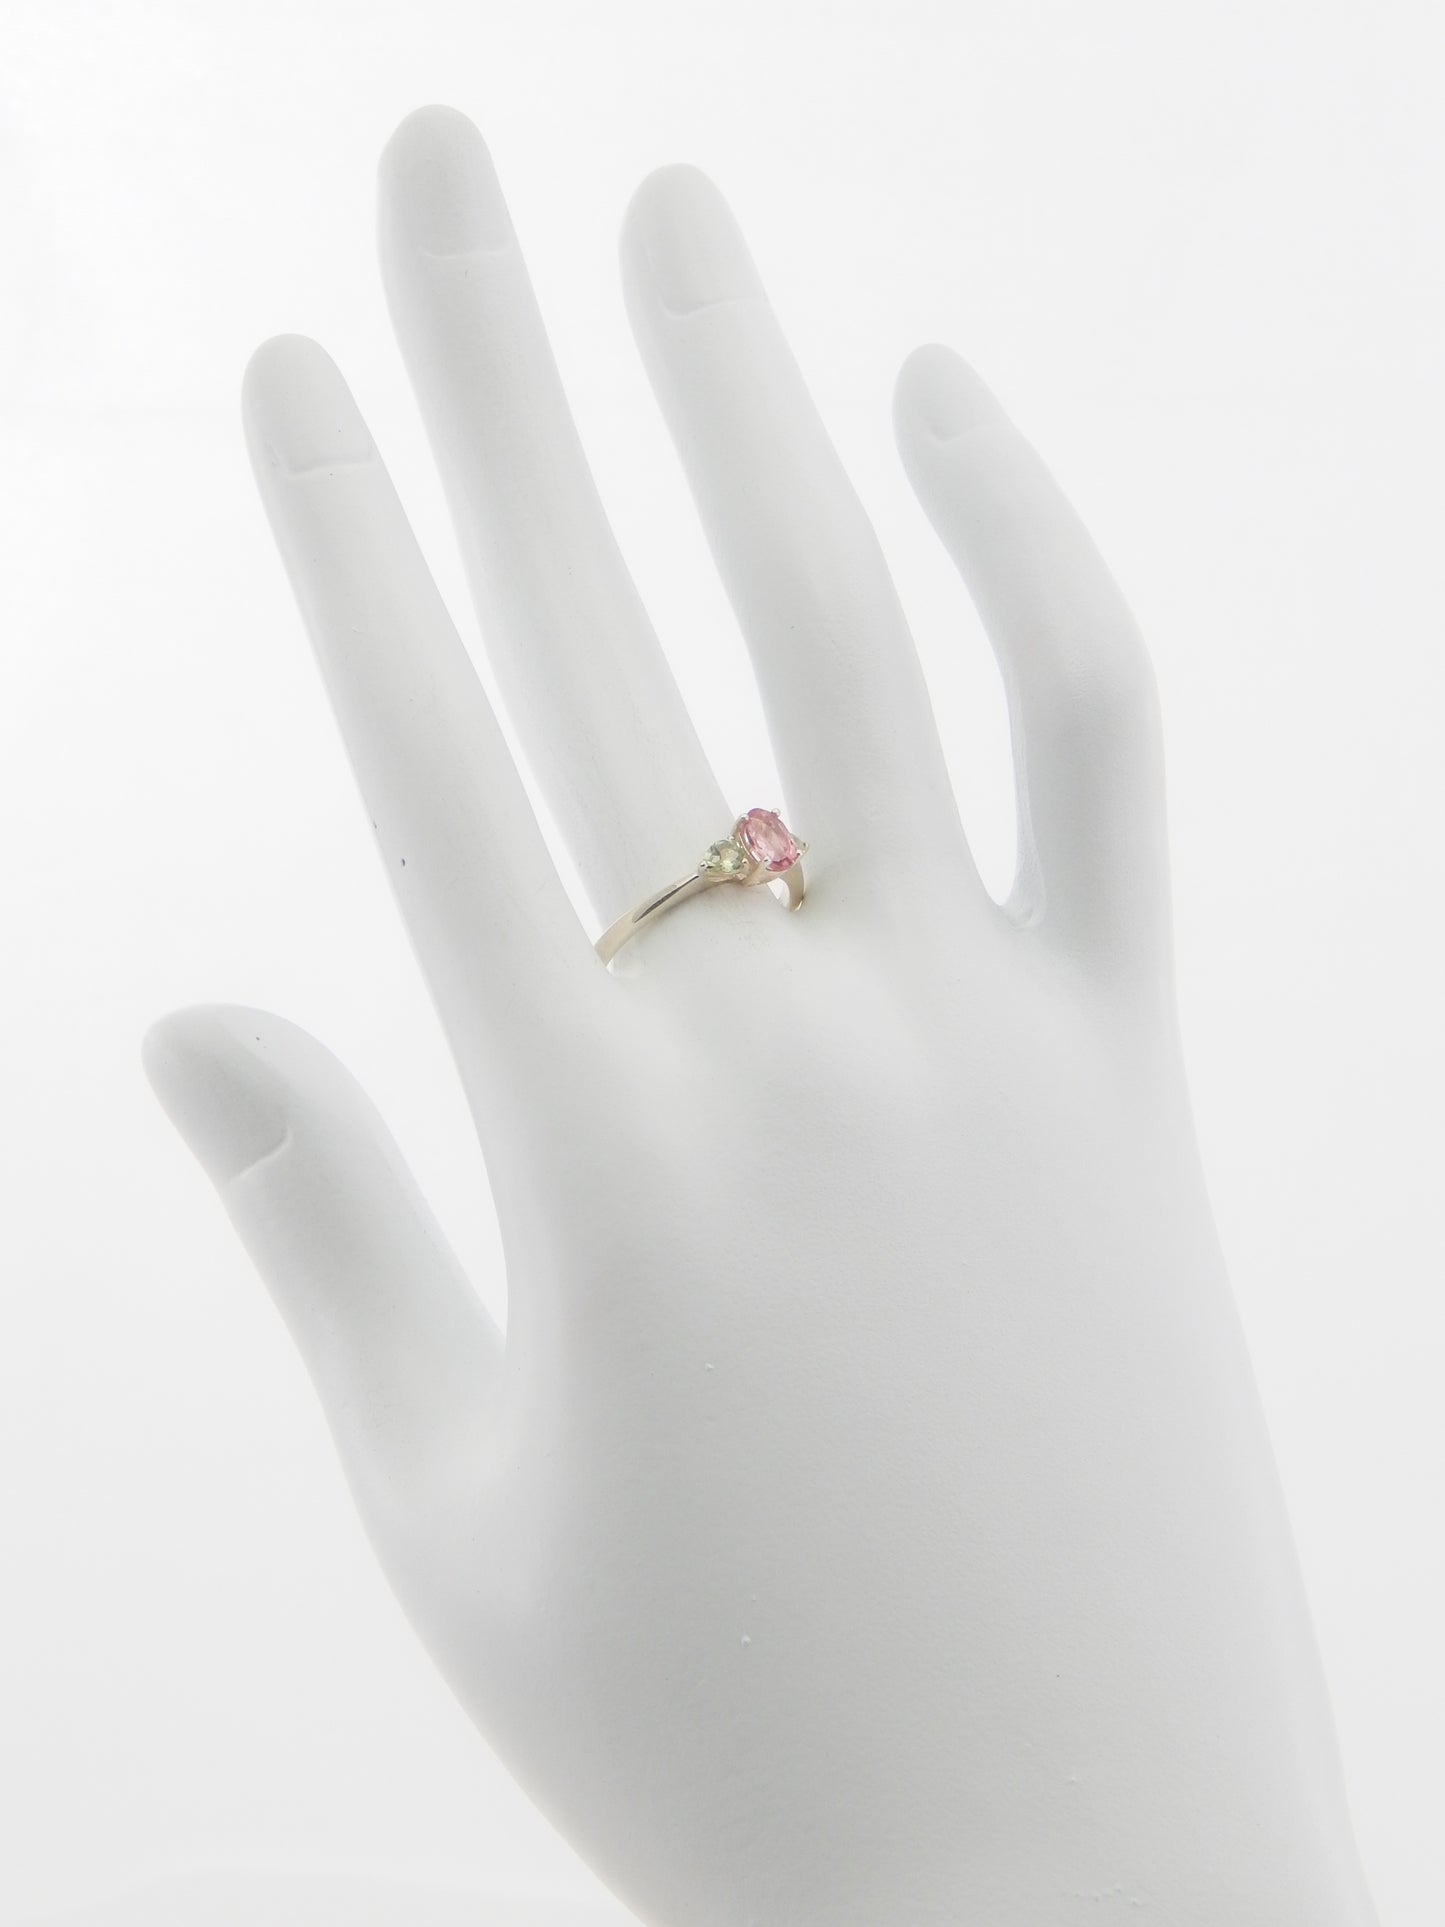 Genuine Pink and Green Tourmaline Ring in 925 Silver